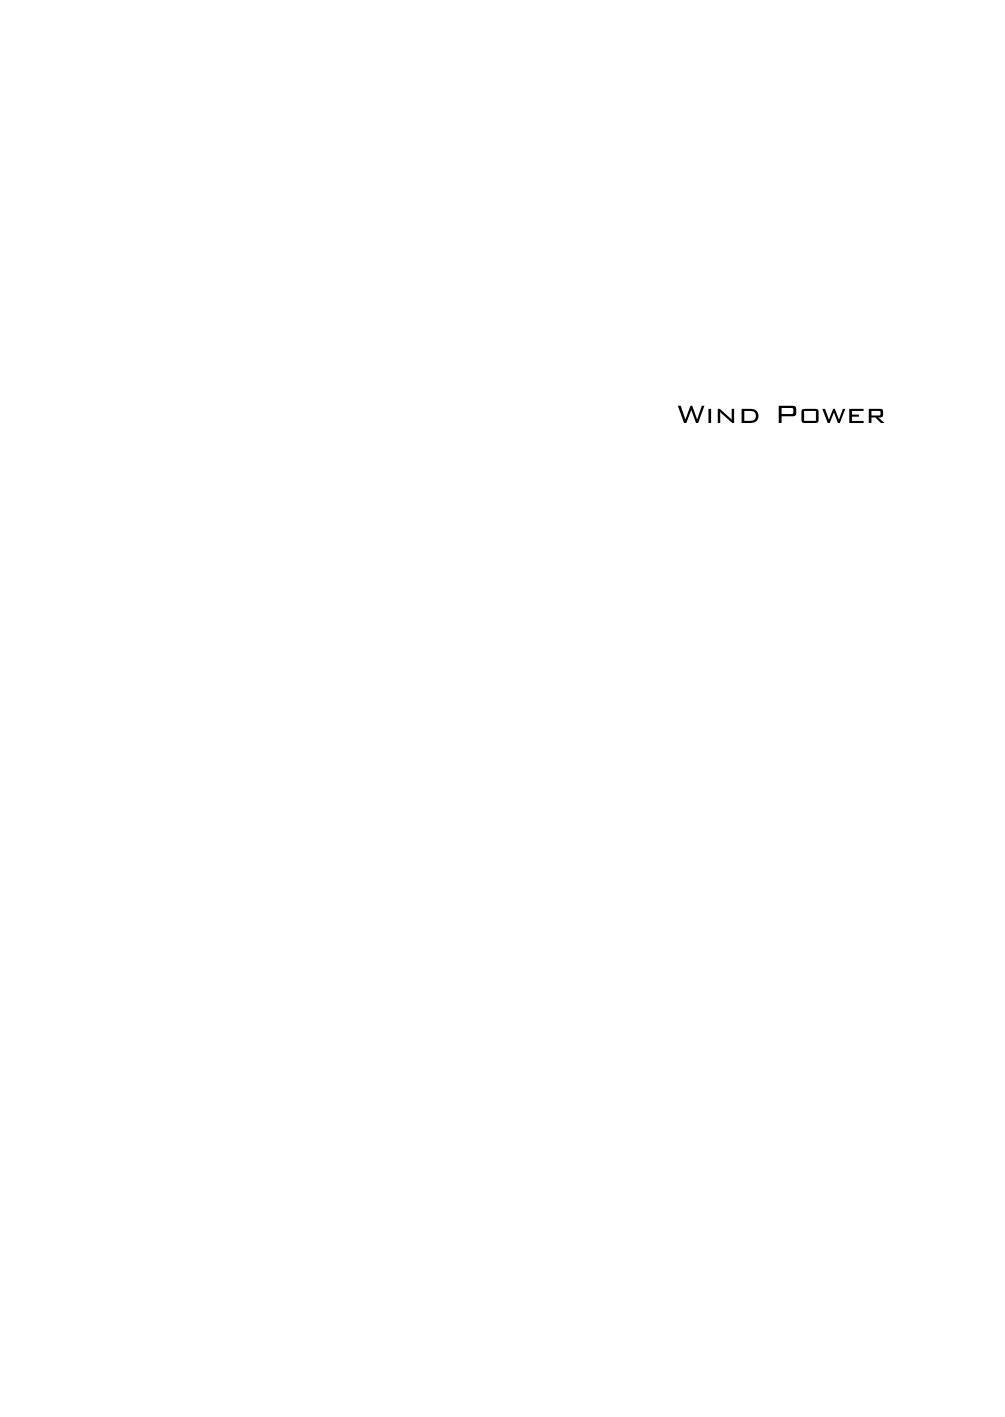 Microsoft Word - Preface&Contents_Wind_Power.doc